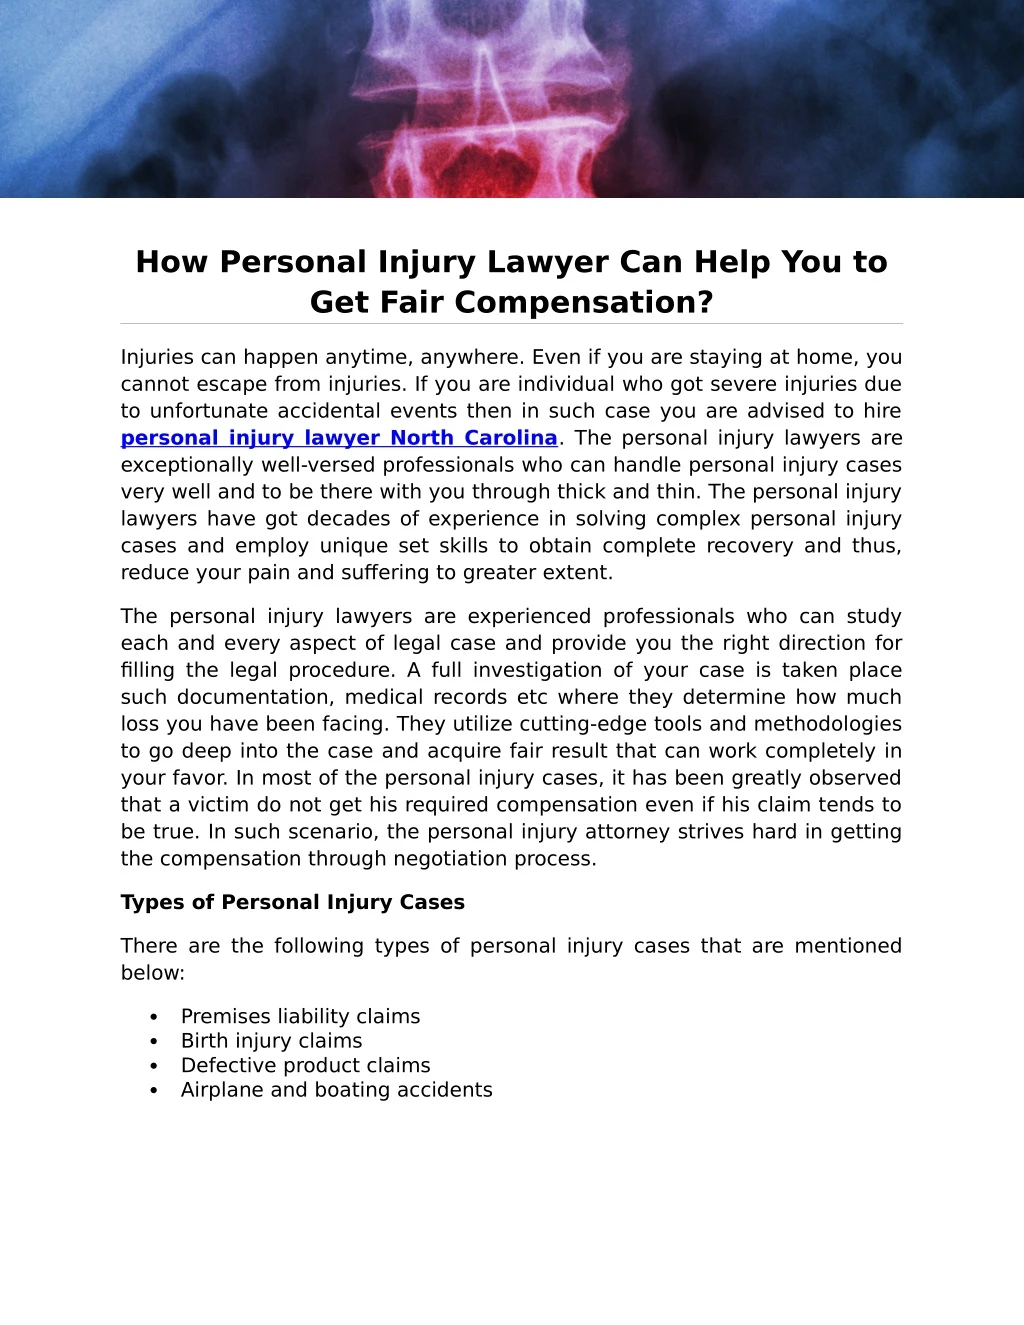 how personal injury lawyer can help